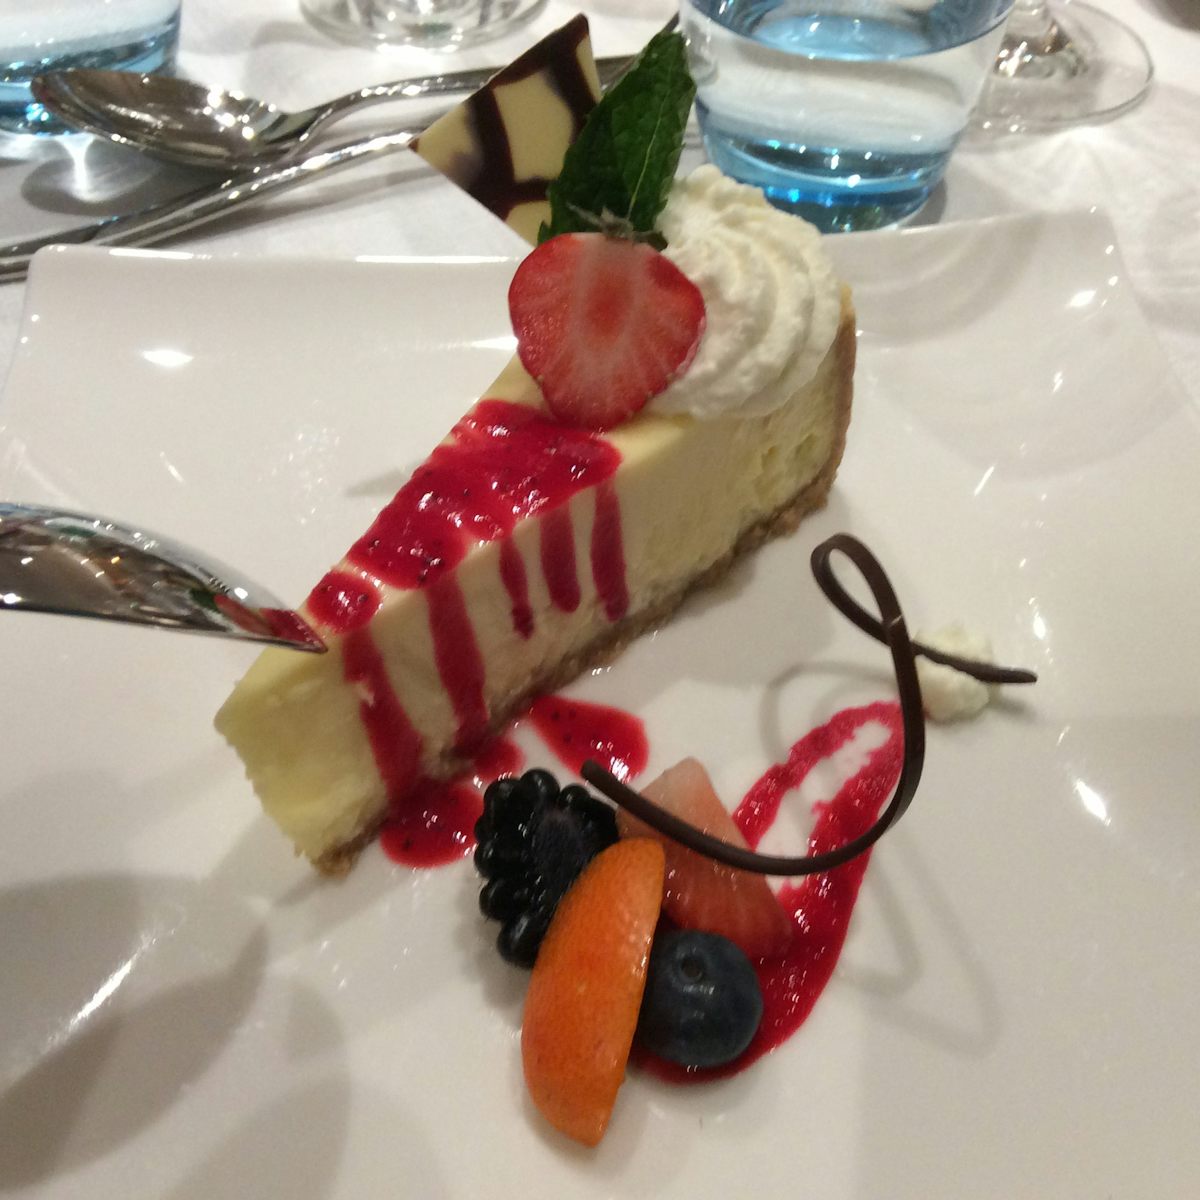 One of the awesome desserts we sampled on board.